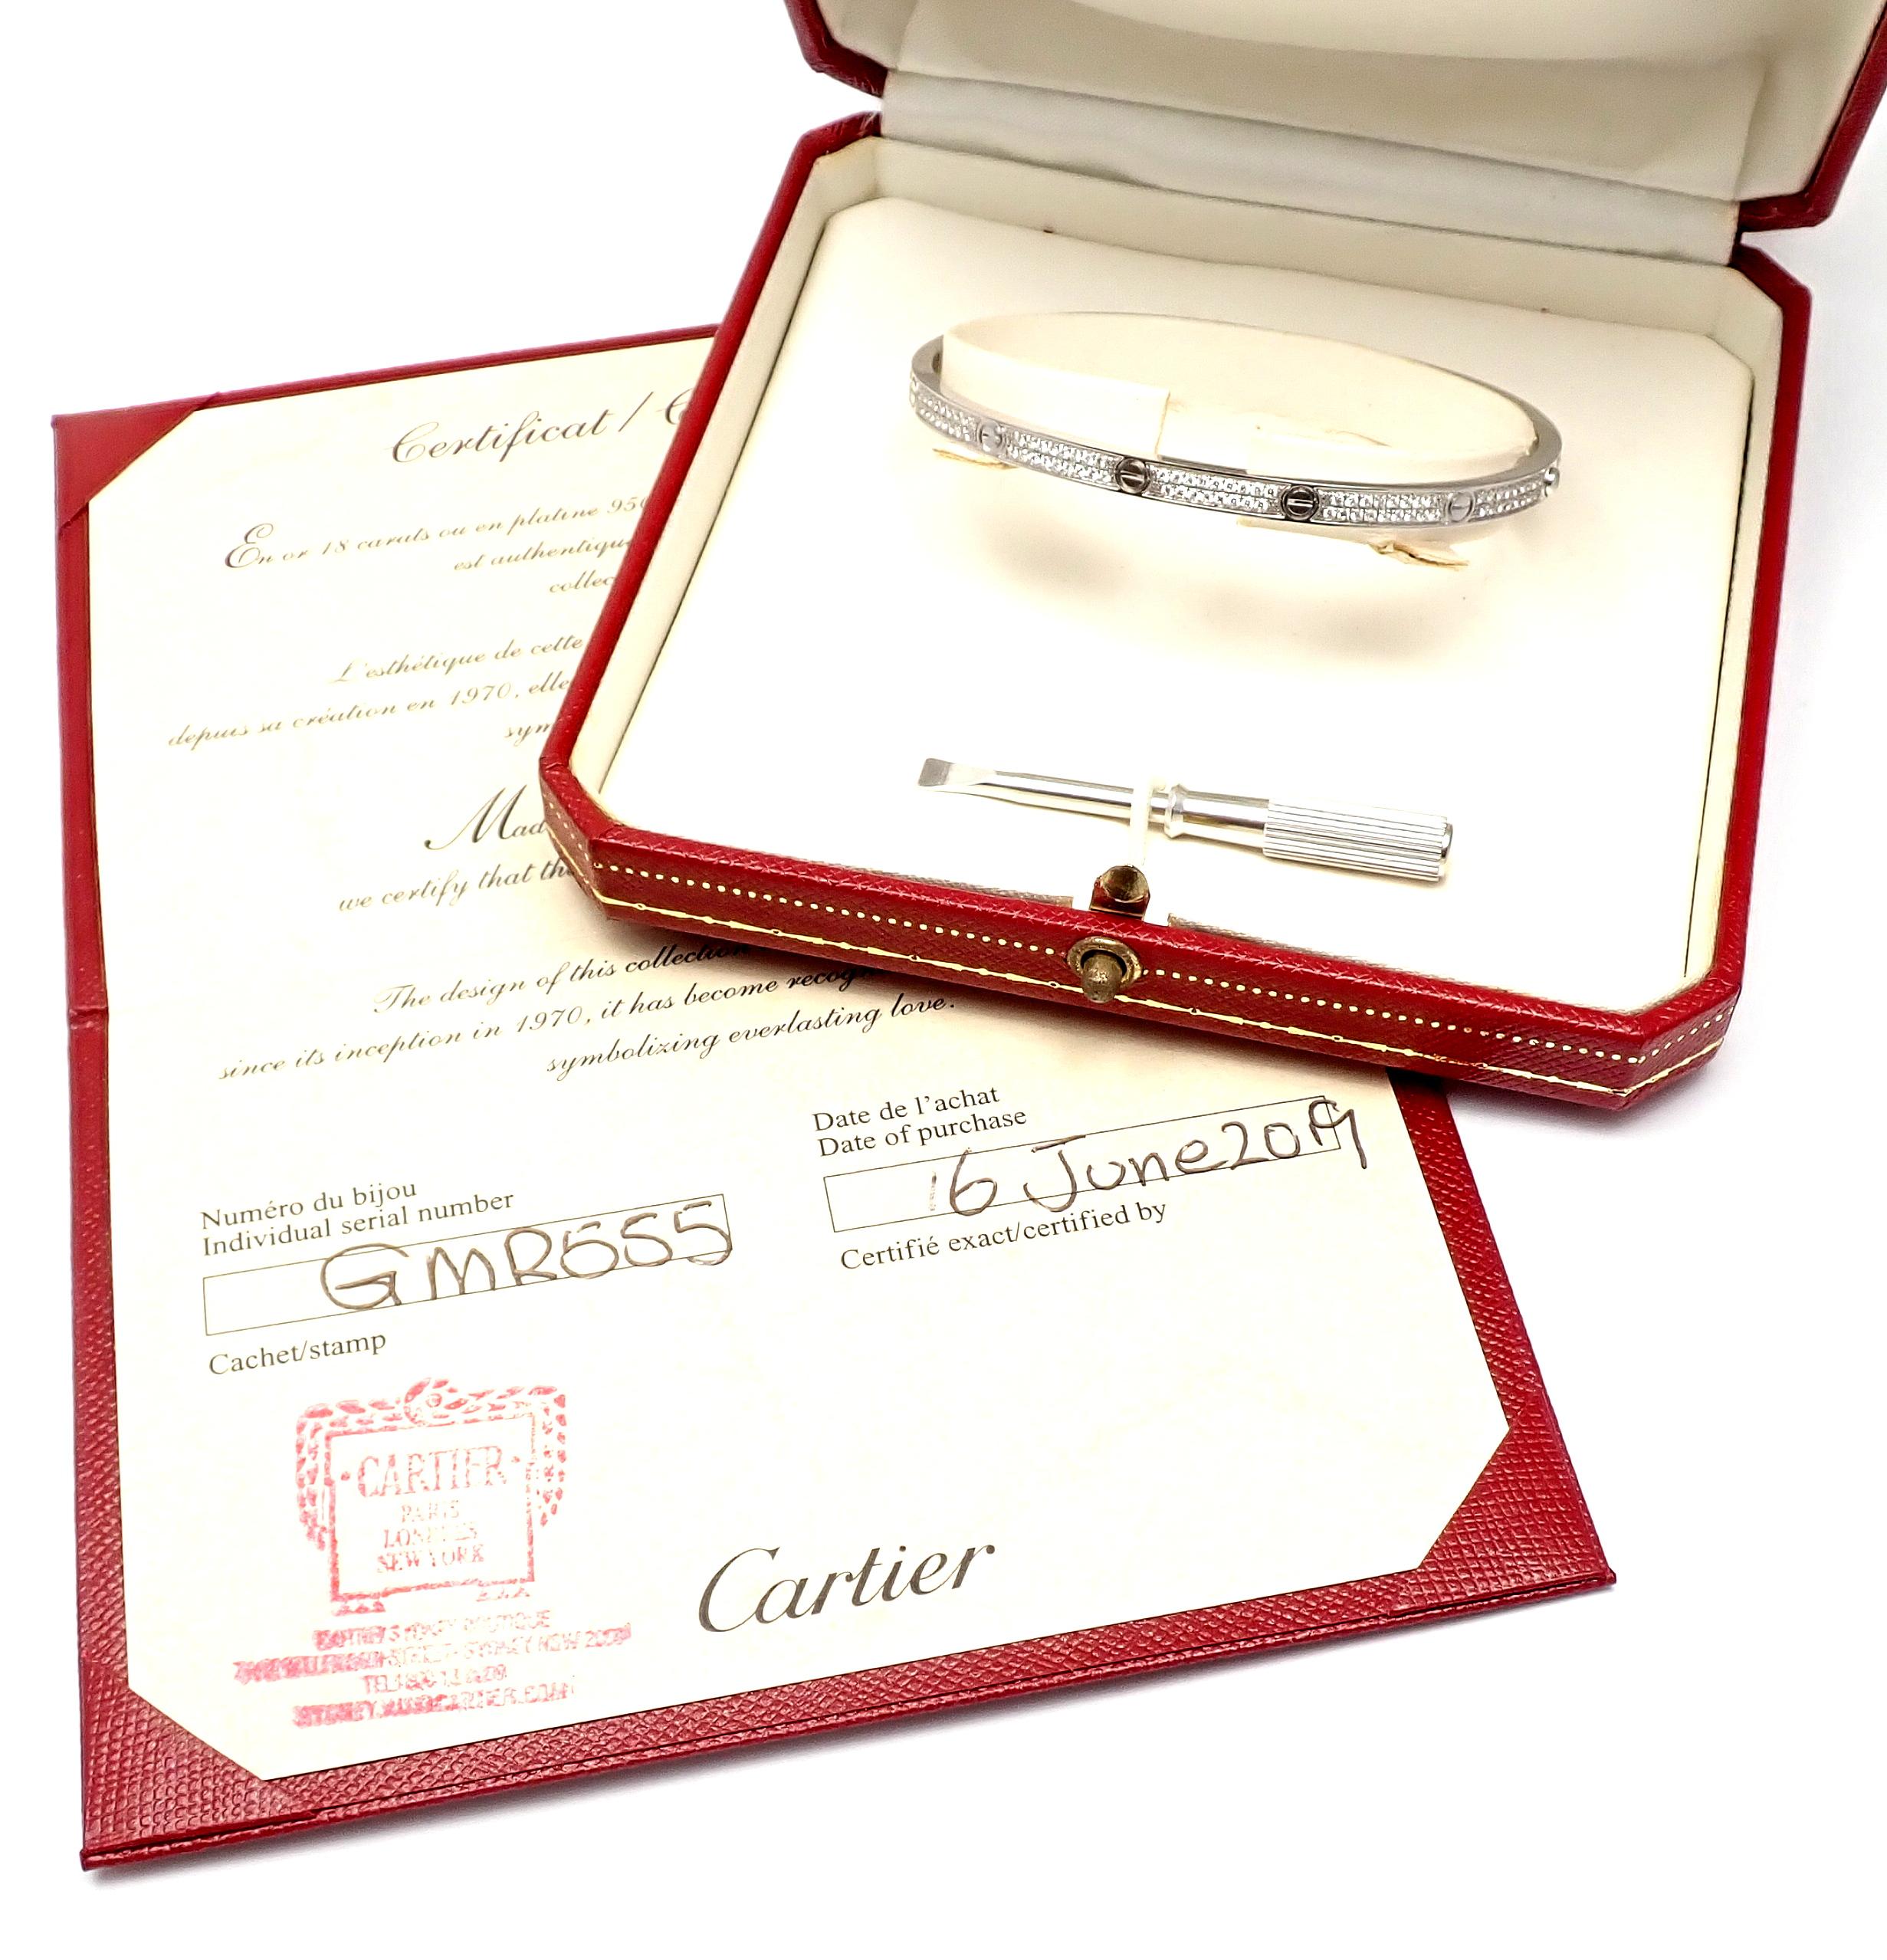 18k White Gold Pave Diamond LOVE Small Model Bangle Bracelet by Cartier. SIZE 18. 
This bracelet comes with Cartier certificate, Cartier sale invoice and Cartier box.
With 177 round brilliant cut diamonds VVS1 clarity, E color total weight approx.